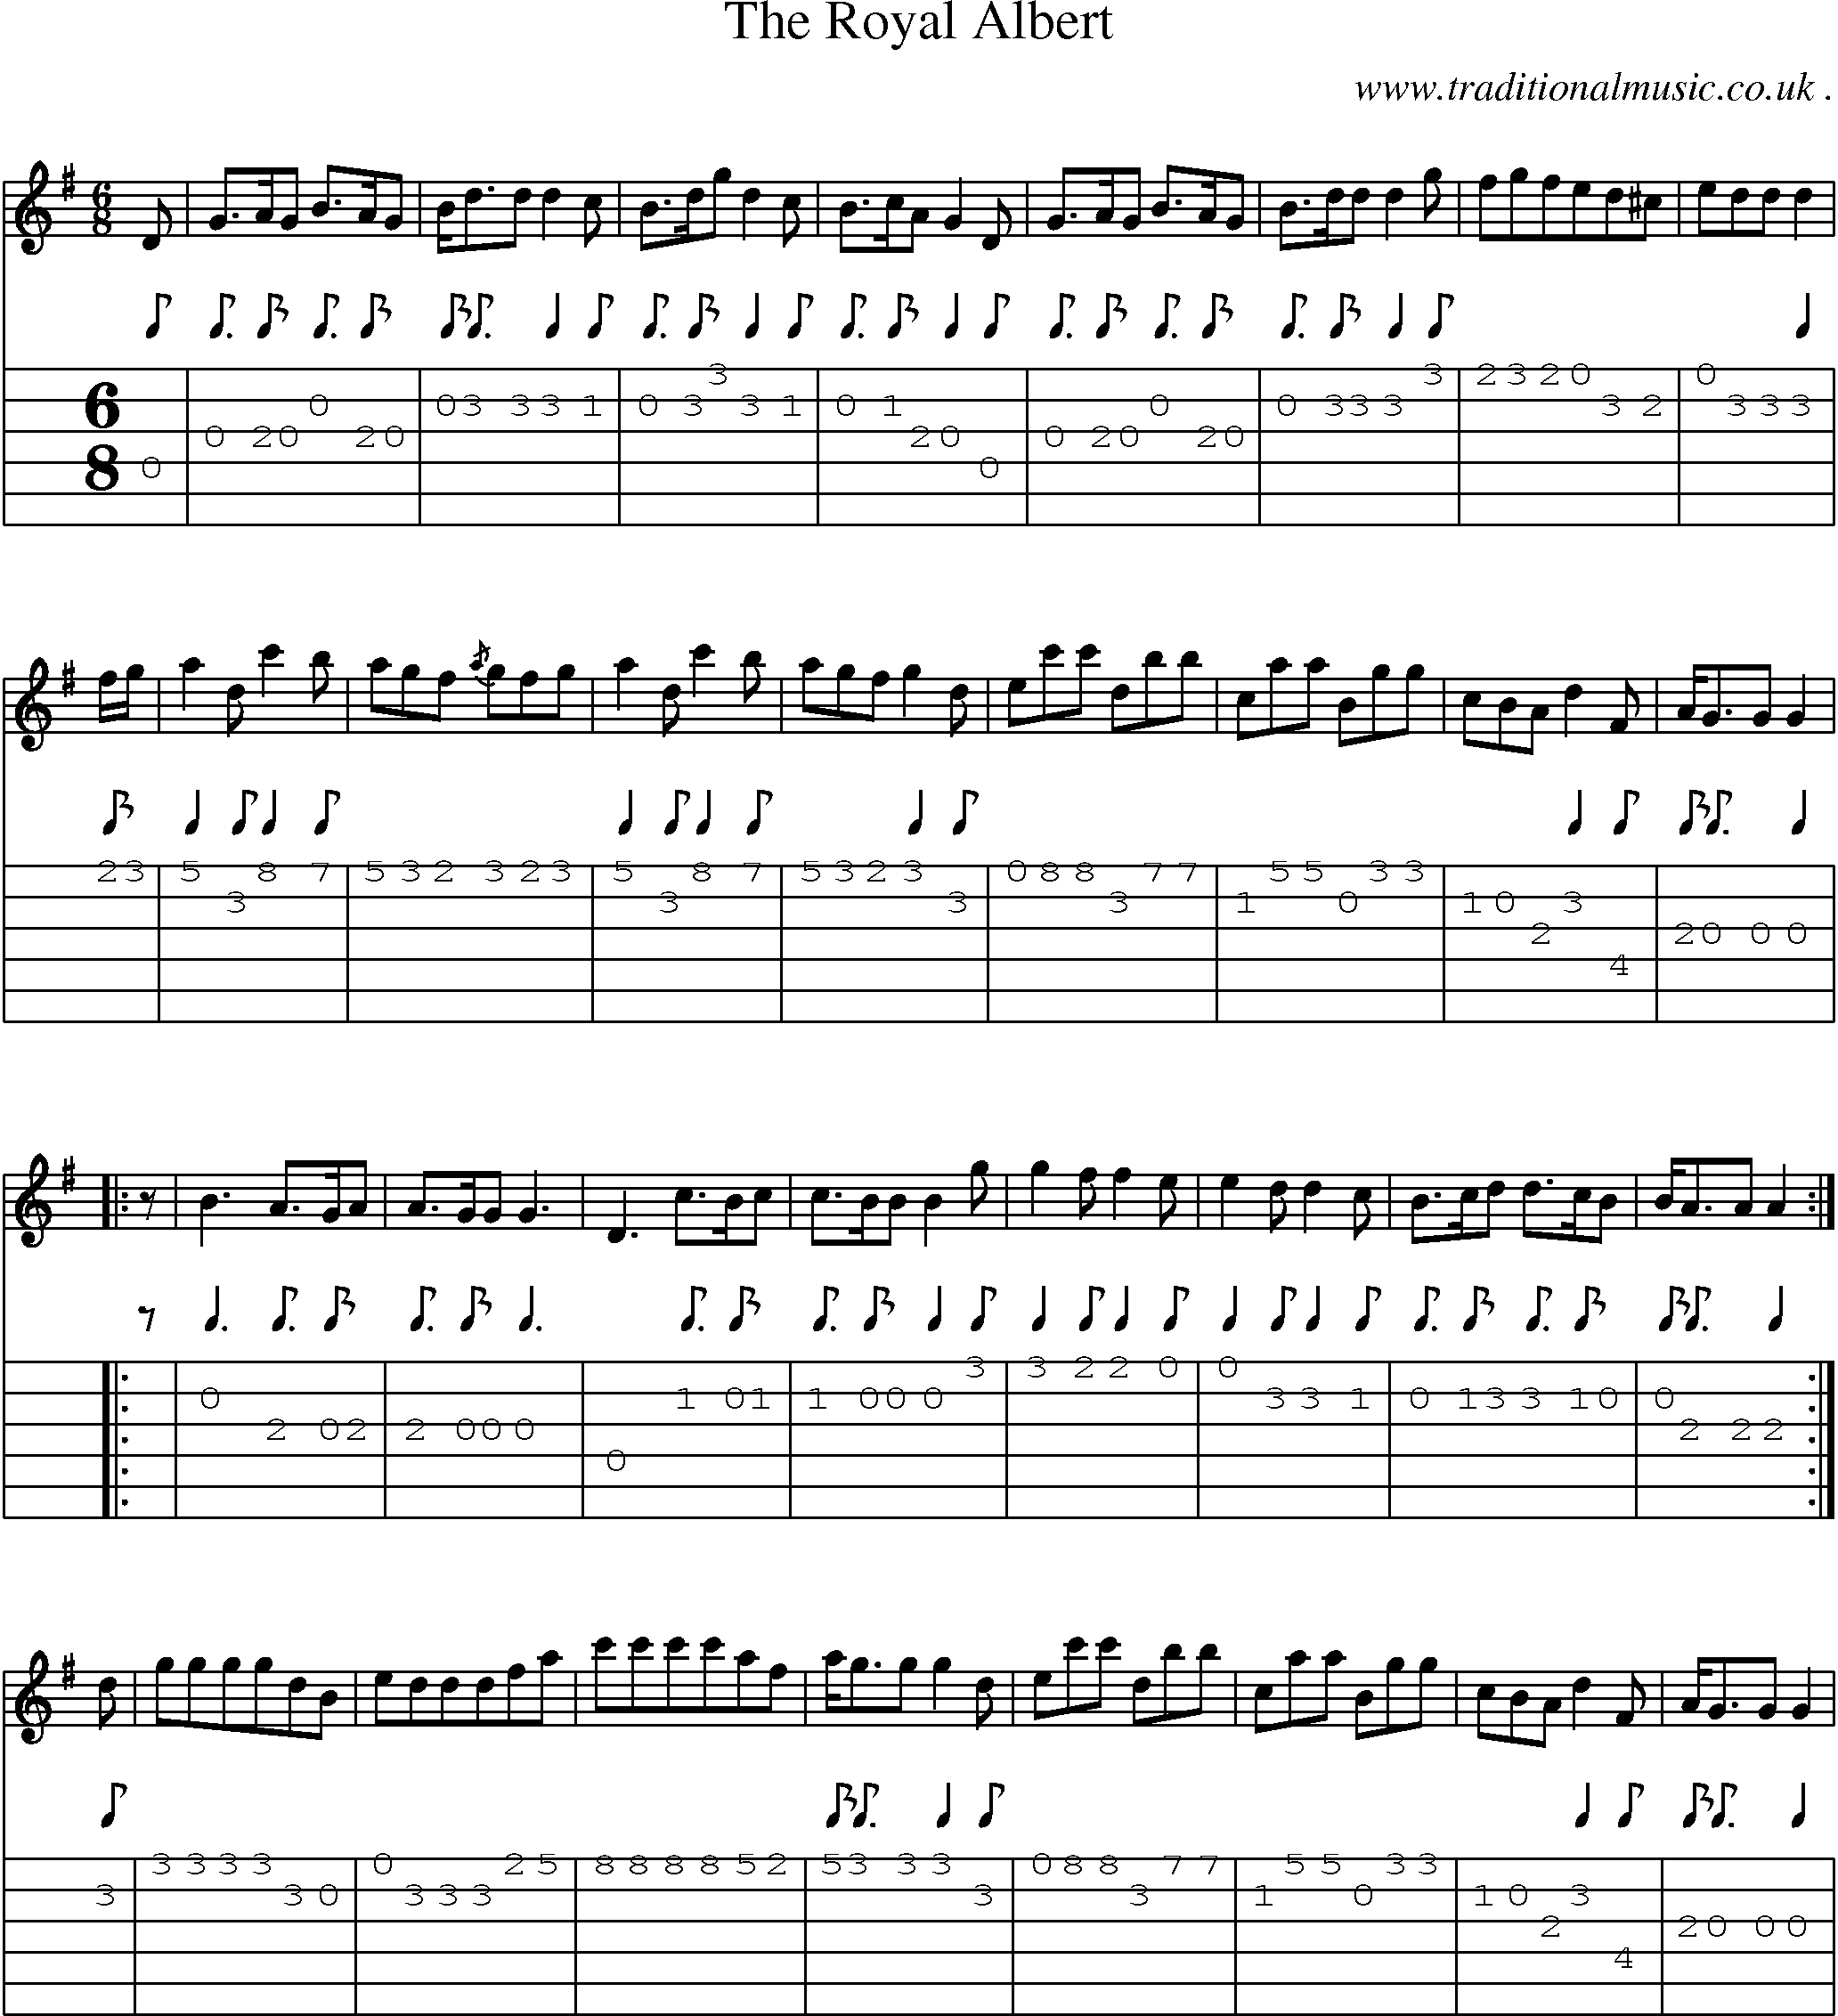 Sheet-music  score, Chords and Guitar Tabs for The Royal Albert